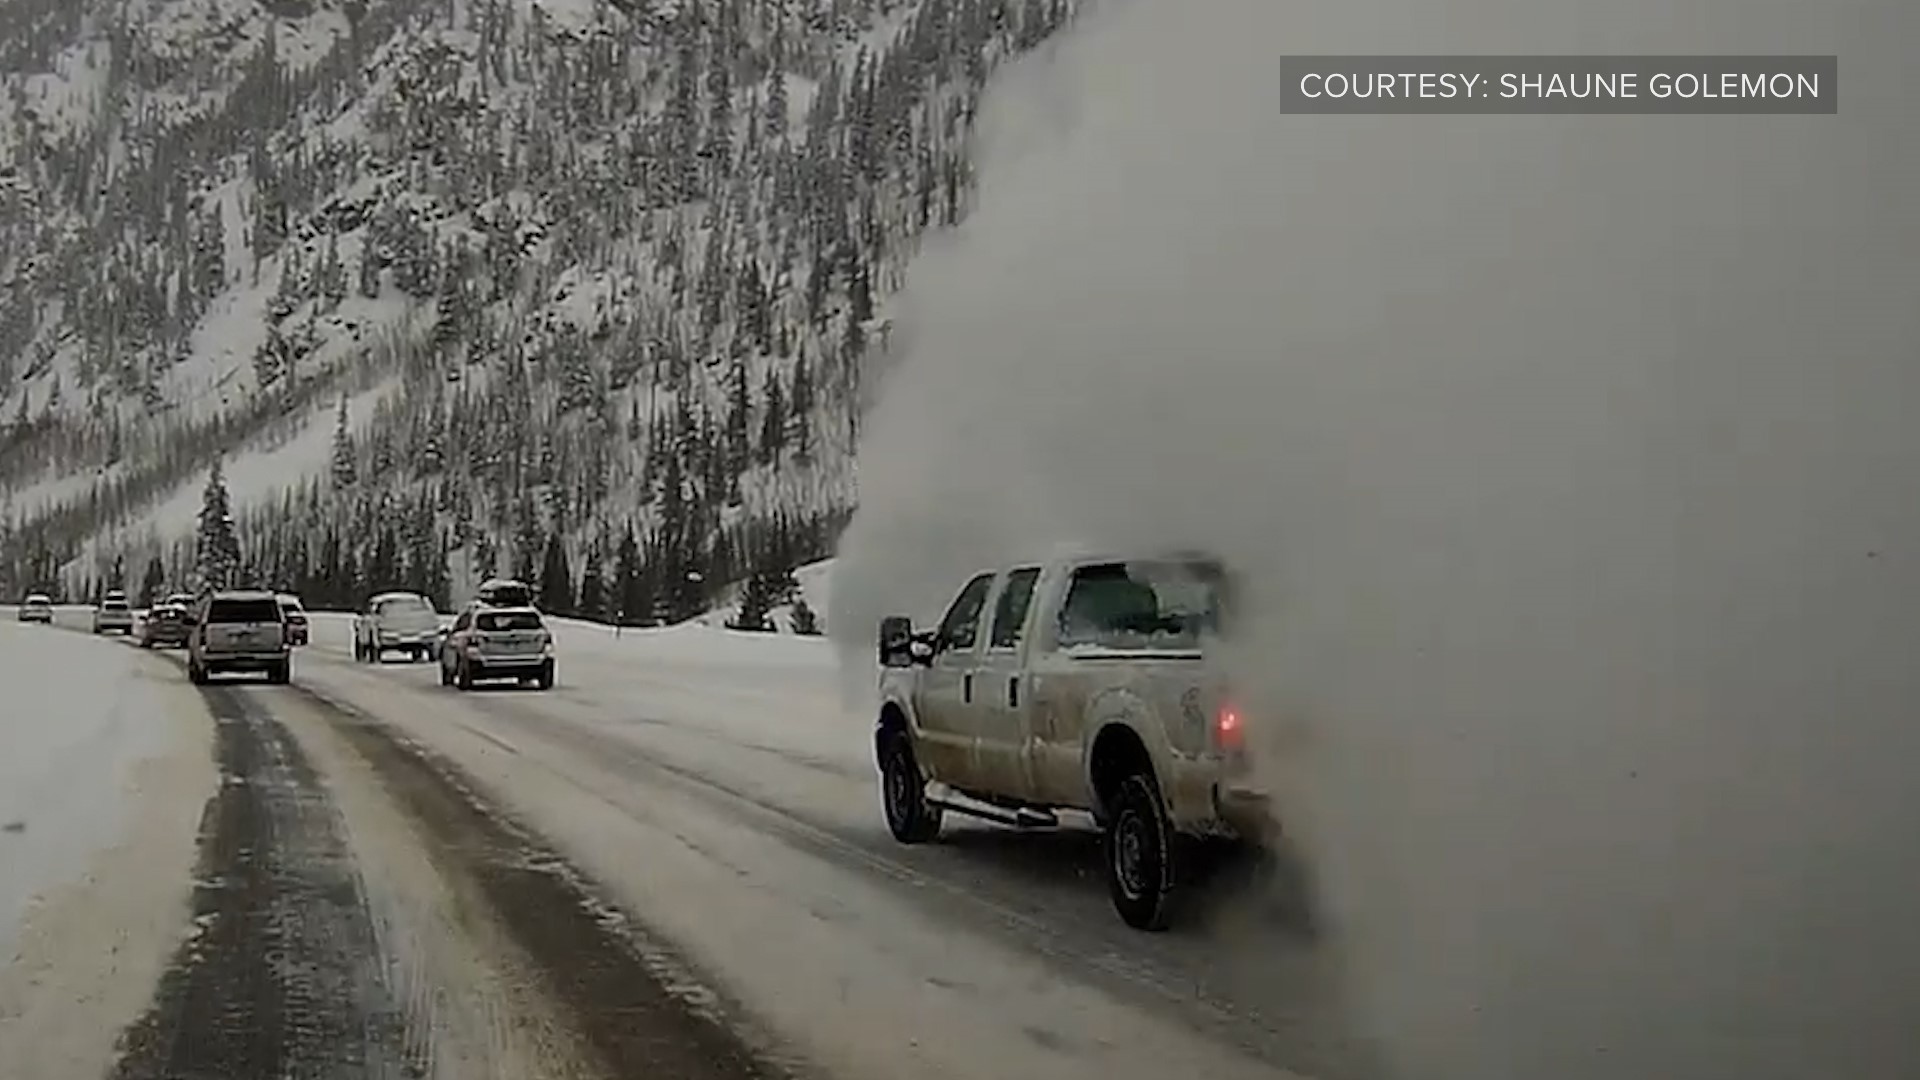 If you've ever wondered what it looks like to be caught in an avalanche, we got you covered - just like the Golemon family's pickup. Shaune Golemon described what happened when the avalanche barreled into his truck, pushing it off the highway into the median.